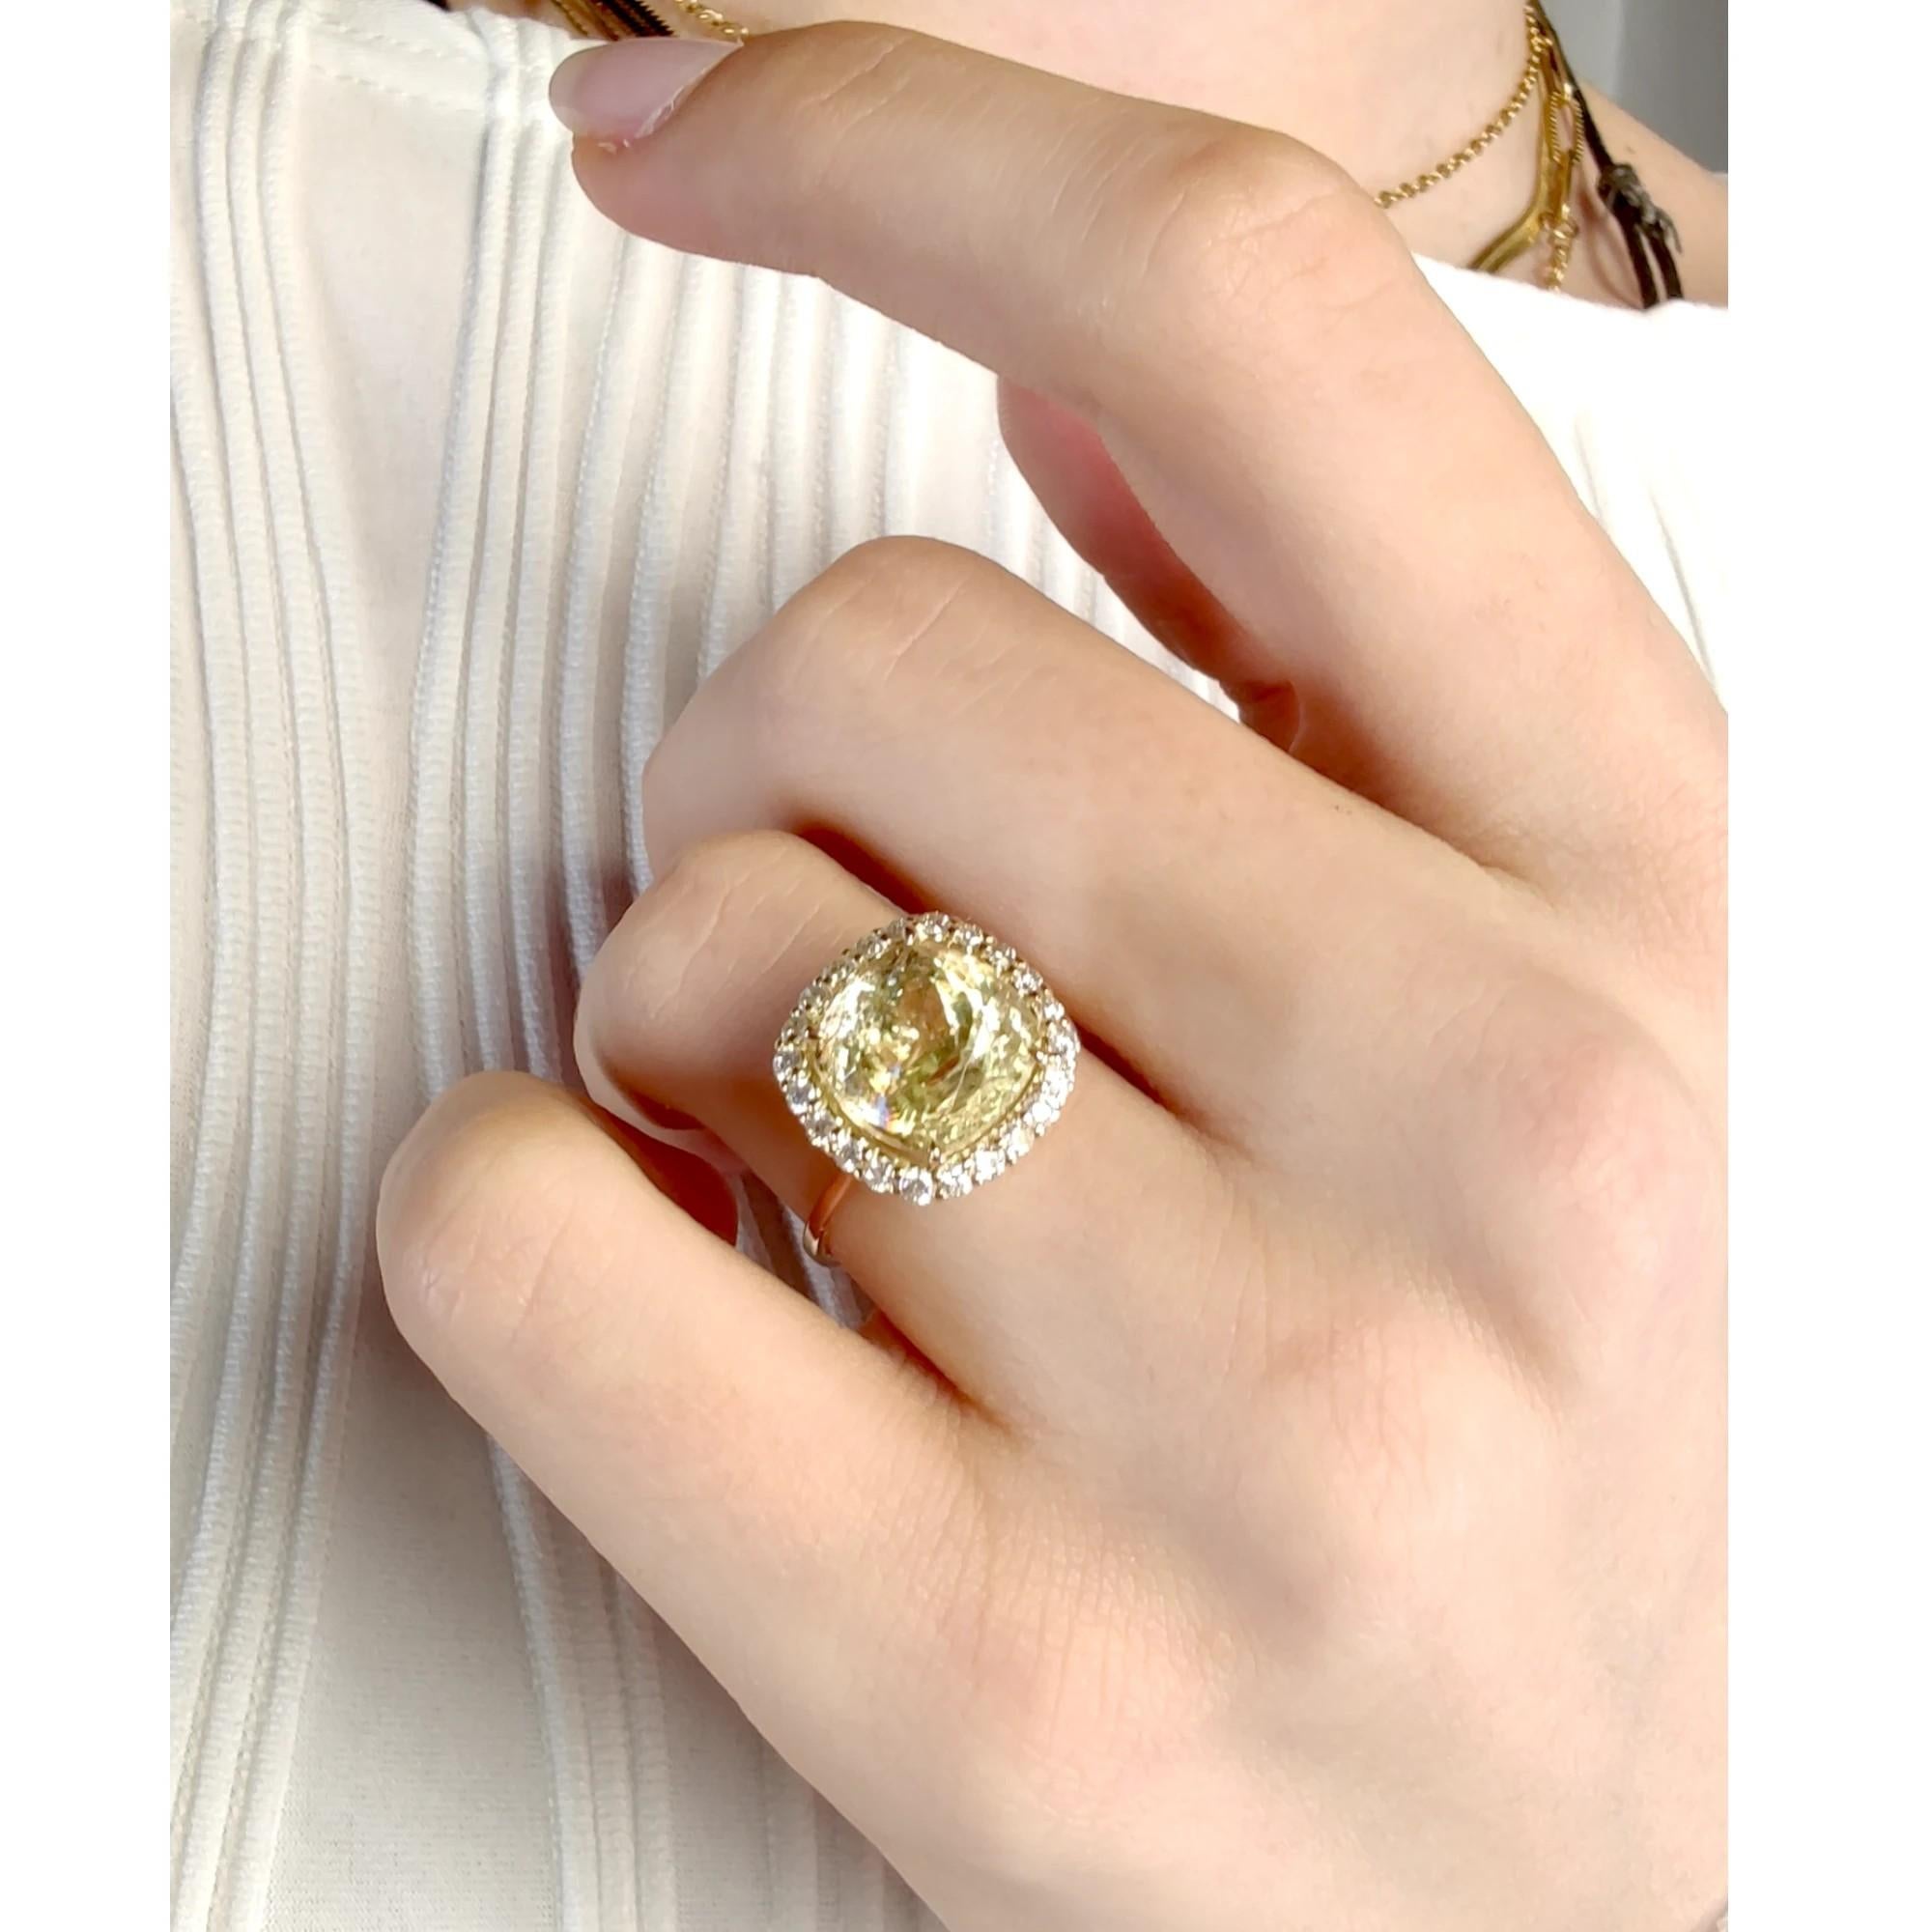 Elevate your style with our Handmade Solid 14K Gold Ring featuring a stunning Yellow Tourmaline and 22 Diamonds. Certified gemstones for the discerning buyer. Exclusive jewelry.

SIZE:
To look at the photos with the scale ruler
-American Size: